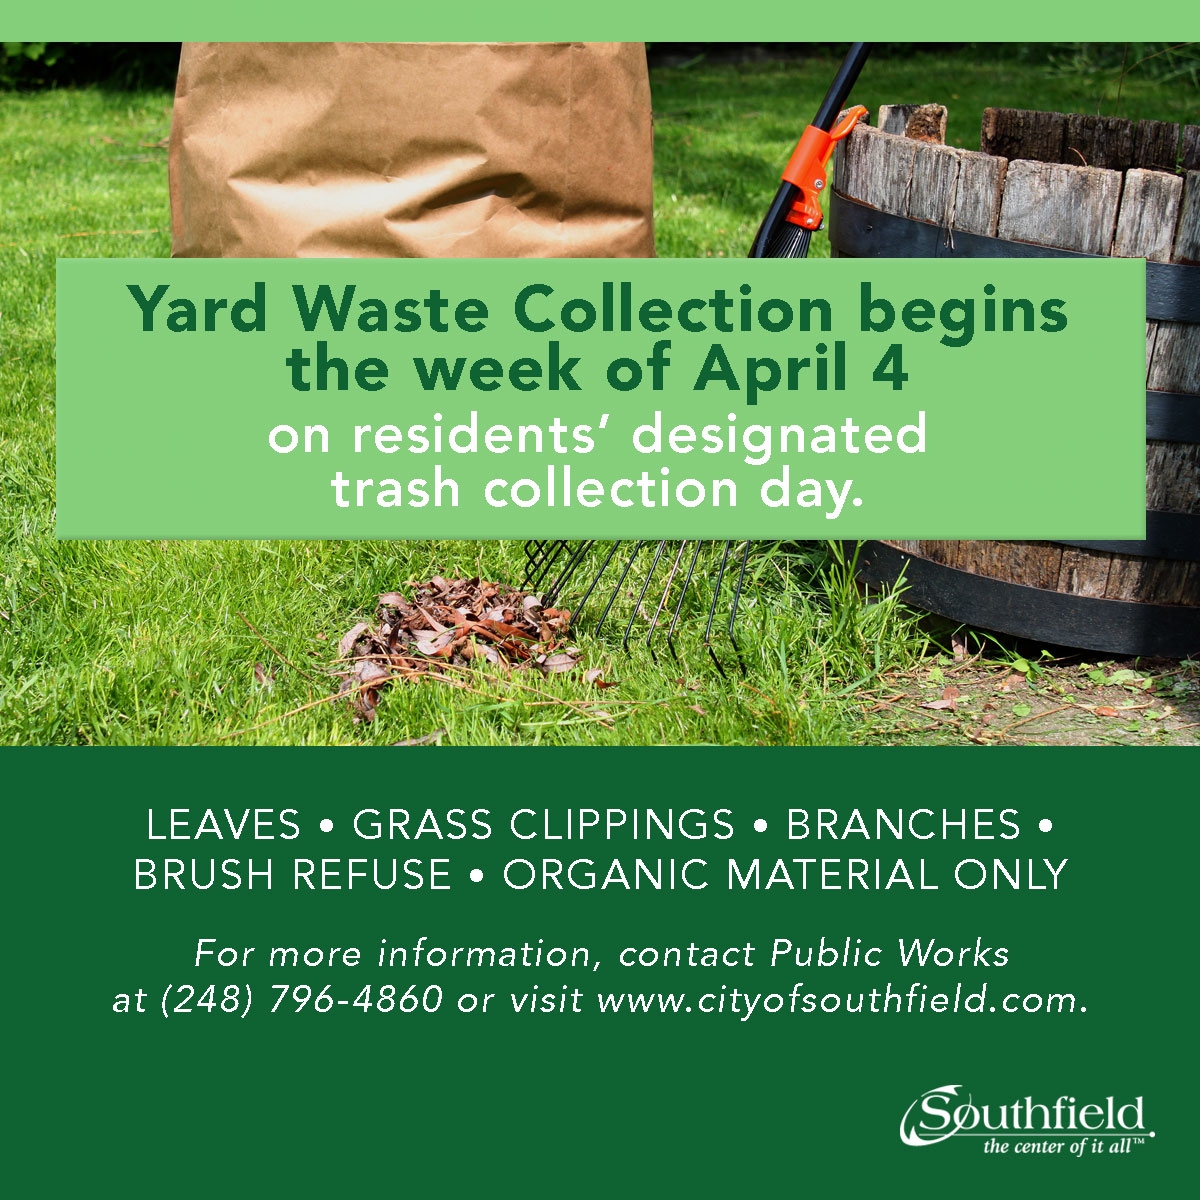 https://www.cityofsouthfield.com/sites/default/files/styles/full_width_1300px_/public/2022-03/Yard_Waste_Collection_begins_2022_1200x1200_0.jpg?itok=KEd76apM